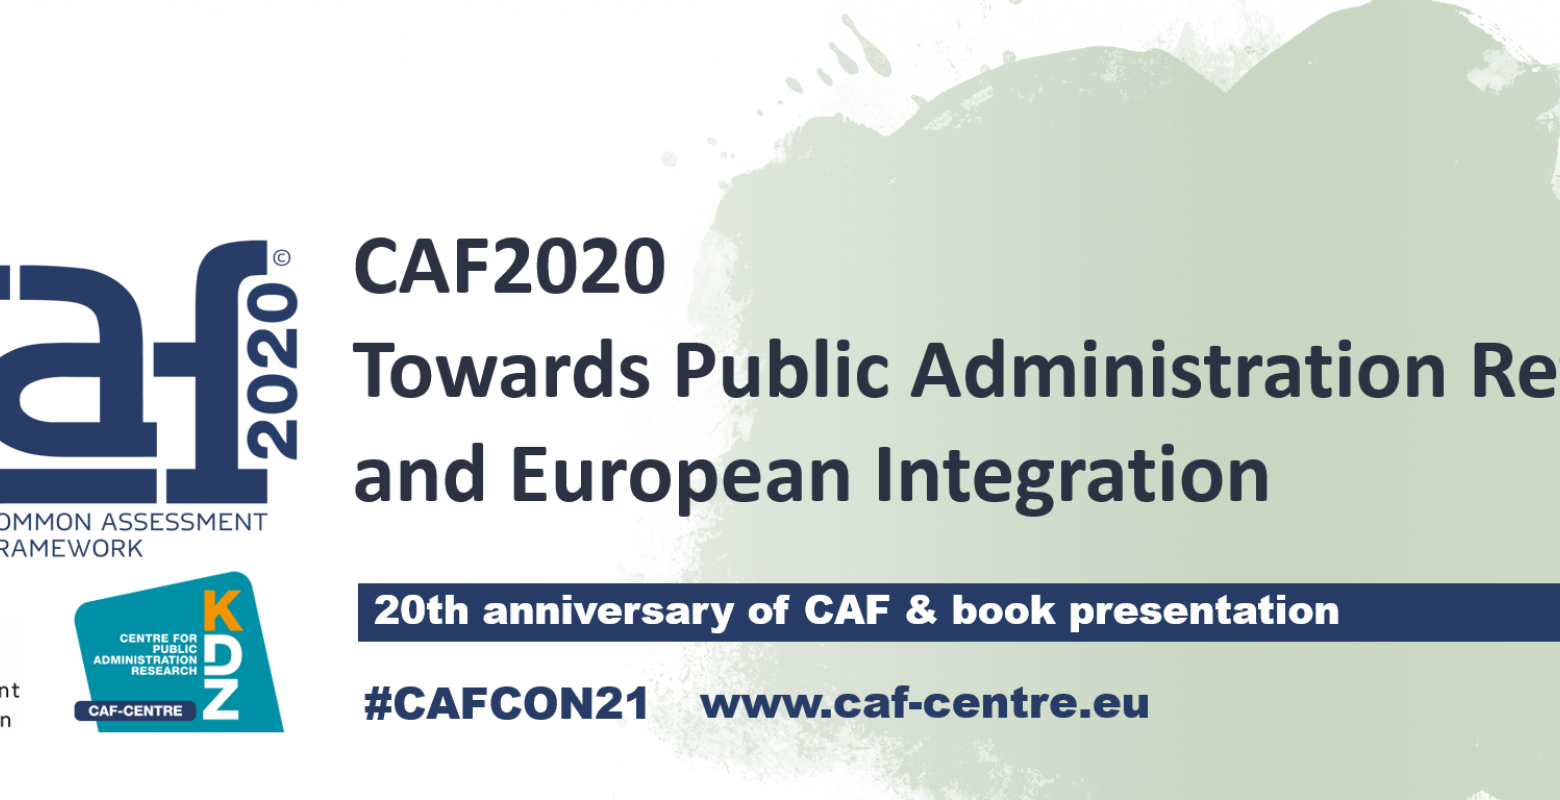 CAF 2020 - Towards Public Administration Reform and European Integration